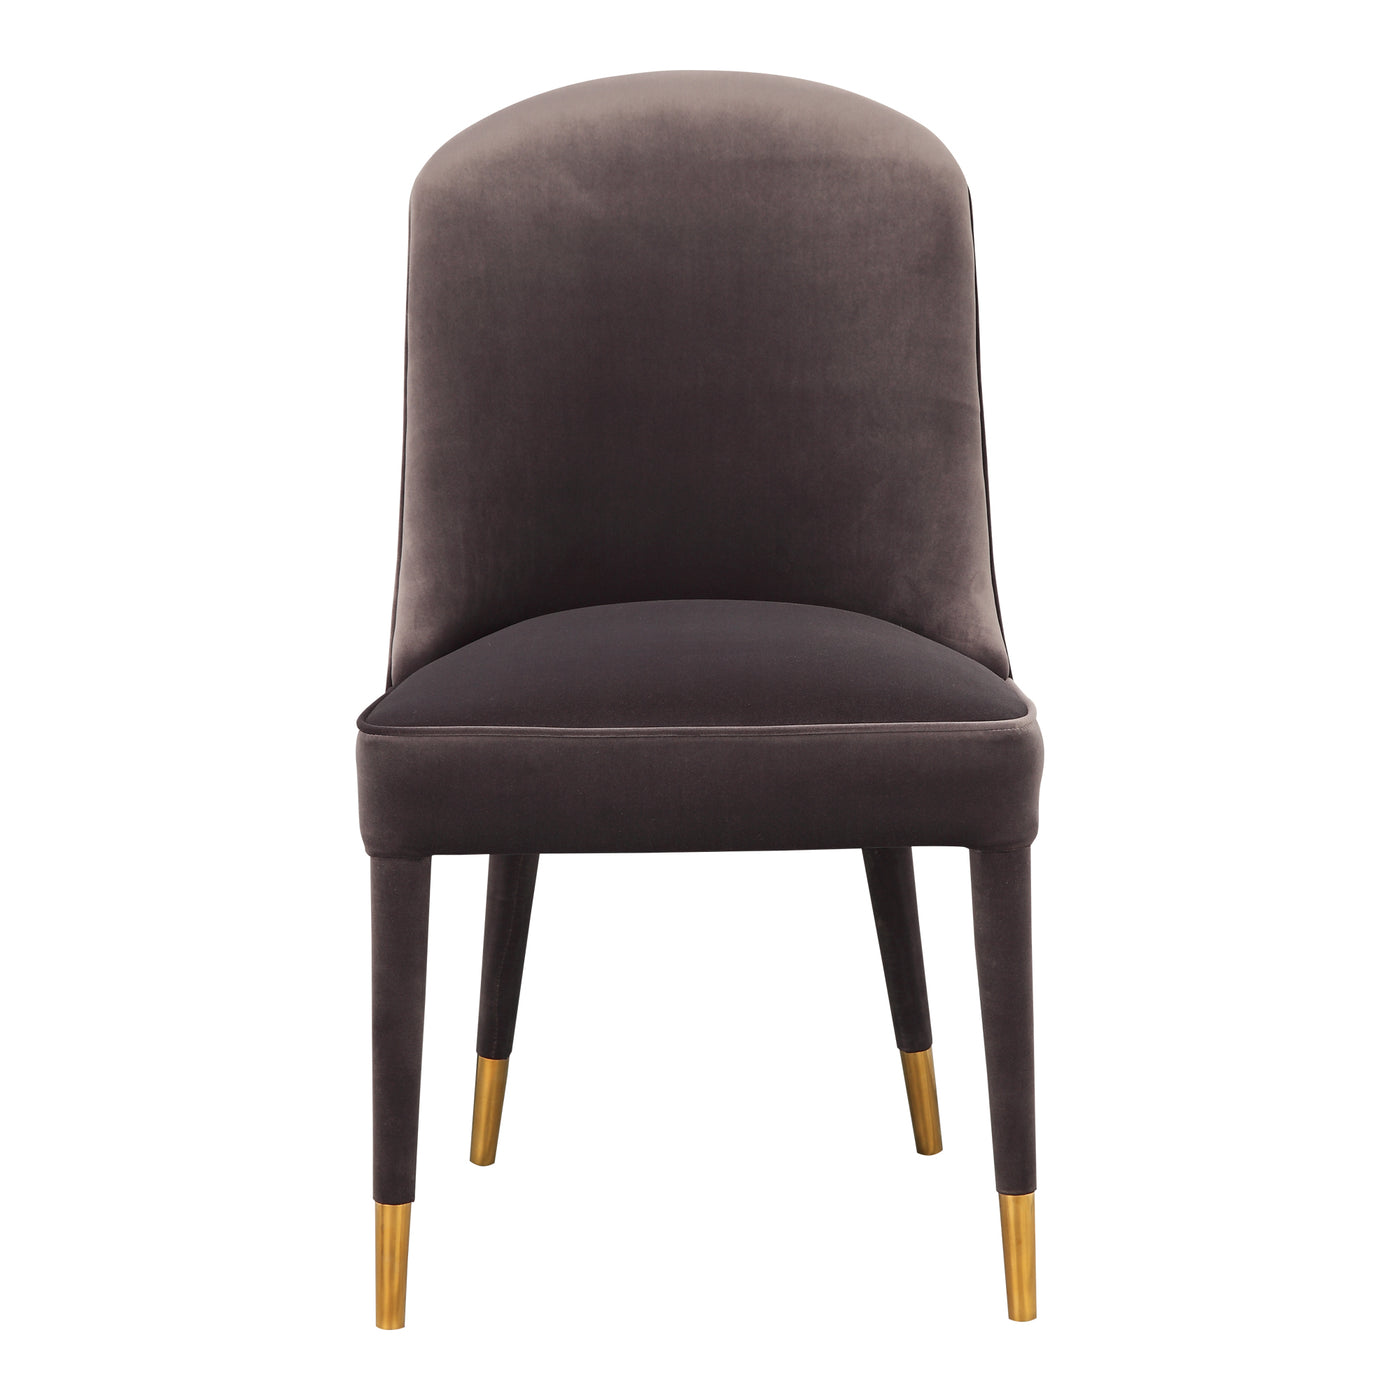 This design is all about old Hollywood glam. The Liberty Dining Chair's brass plated legs and velvety finish bring luxury ...